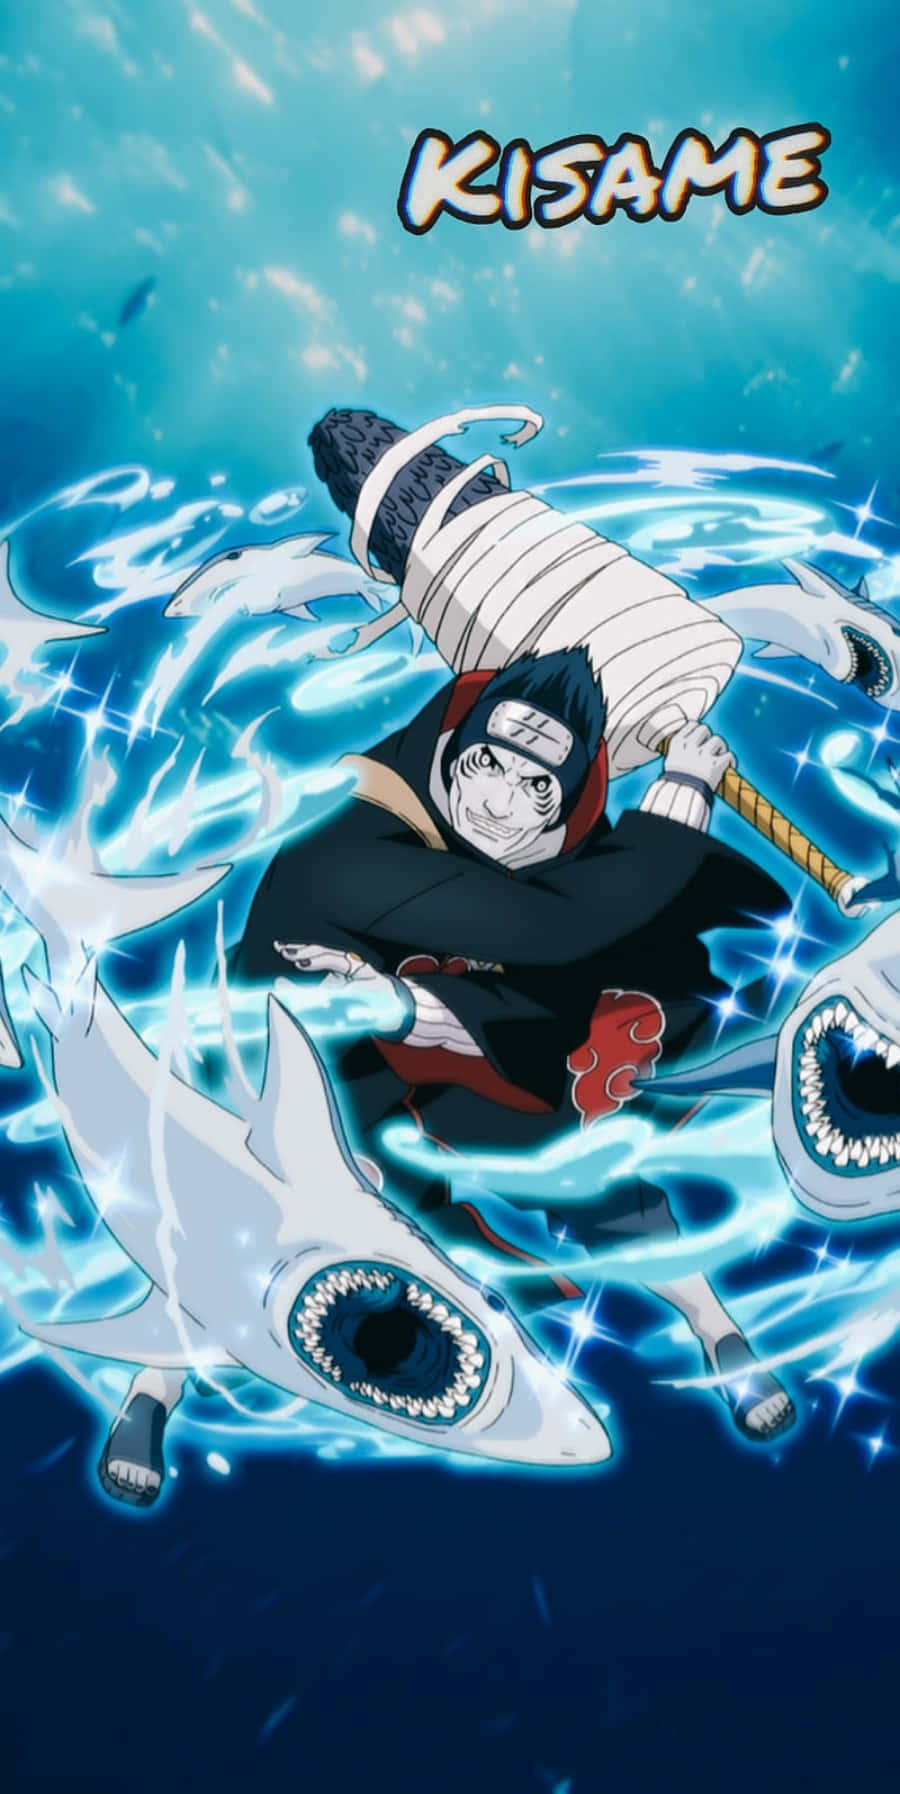 The dastardly force of Kisame Wallpaper